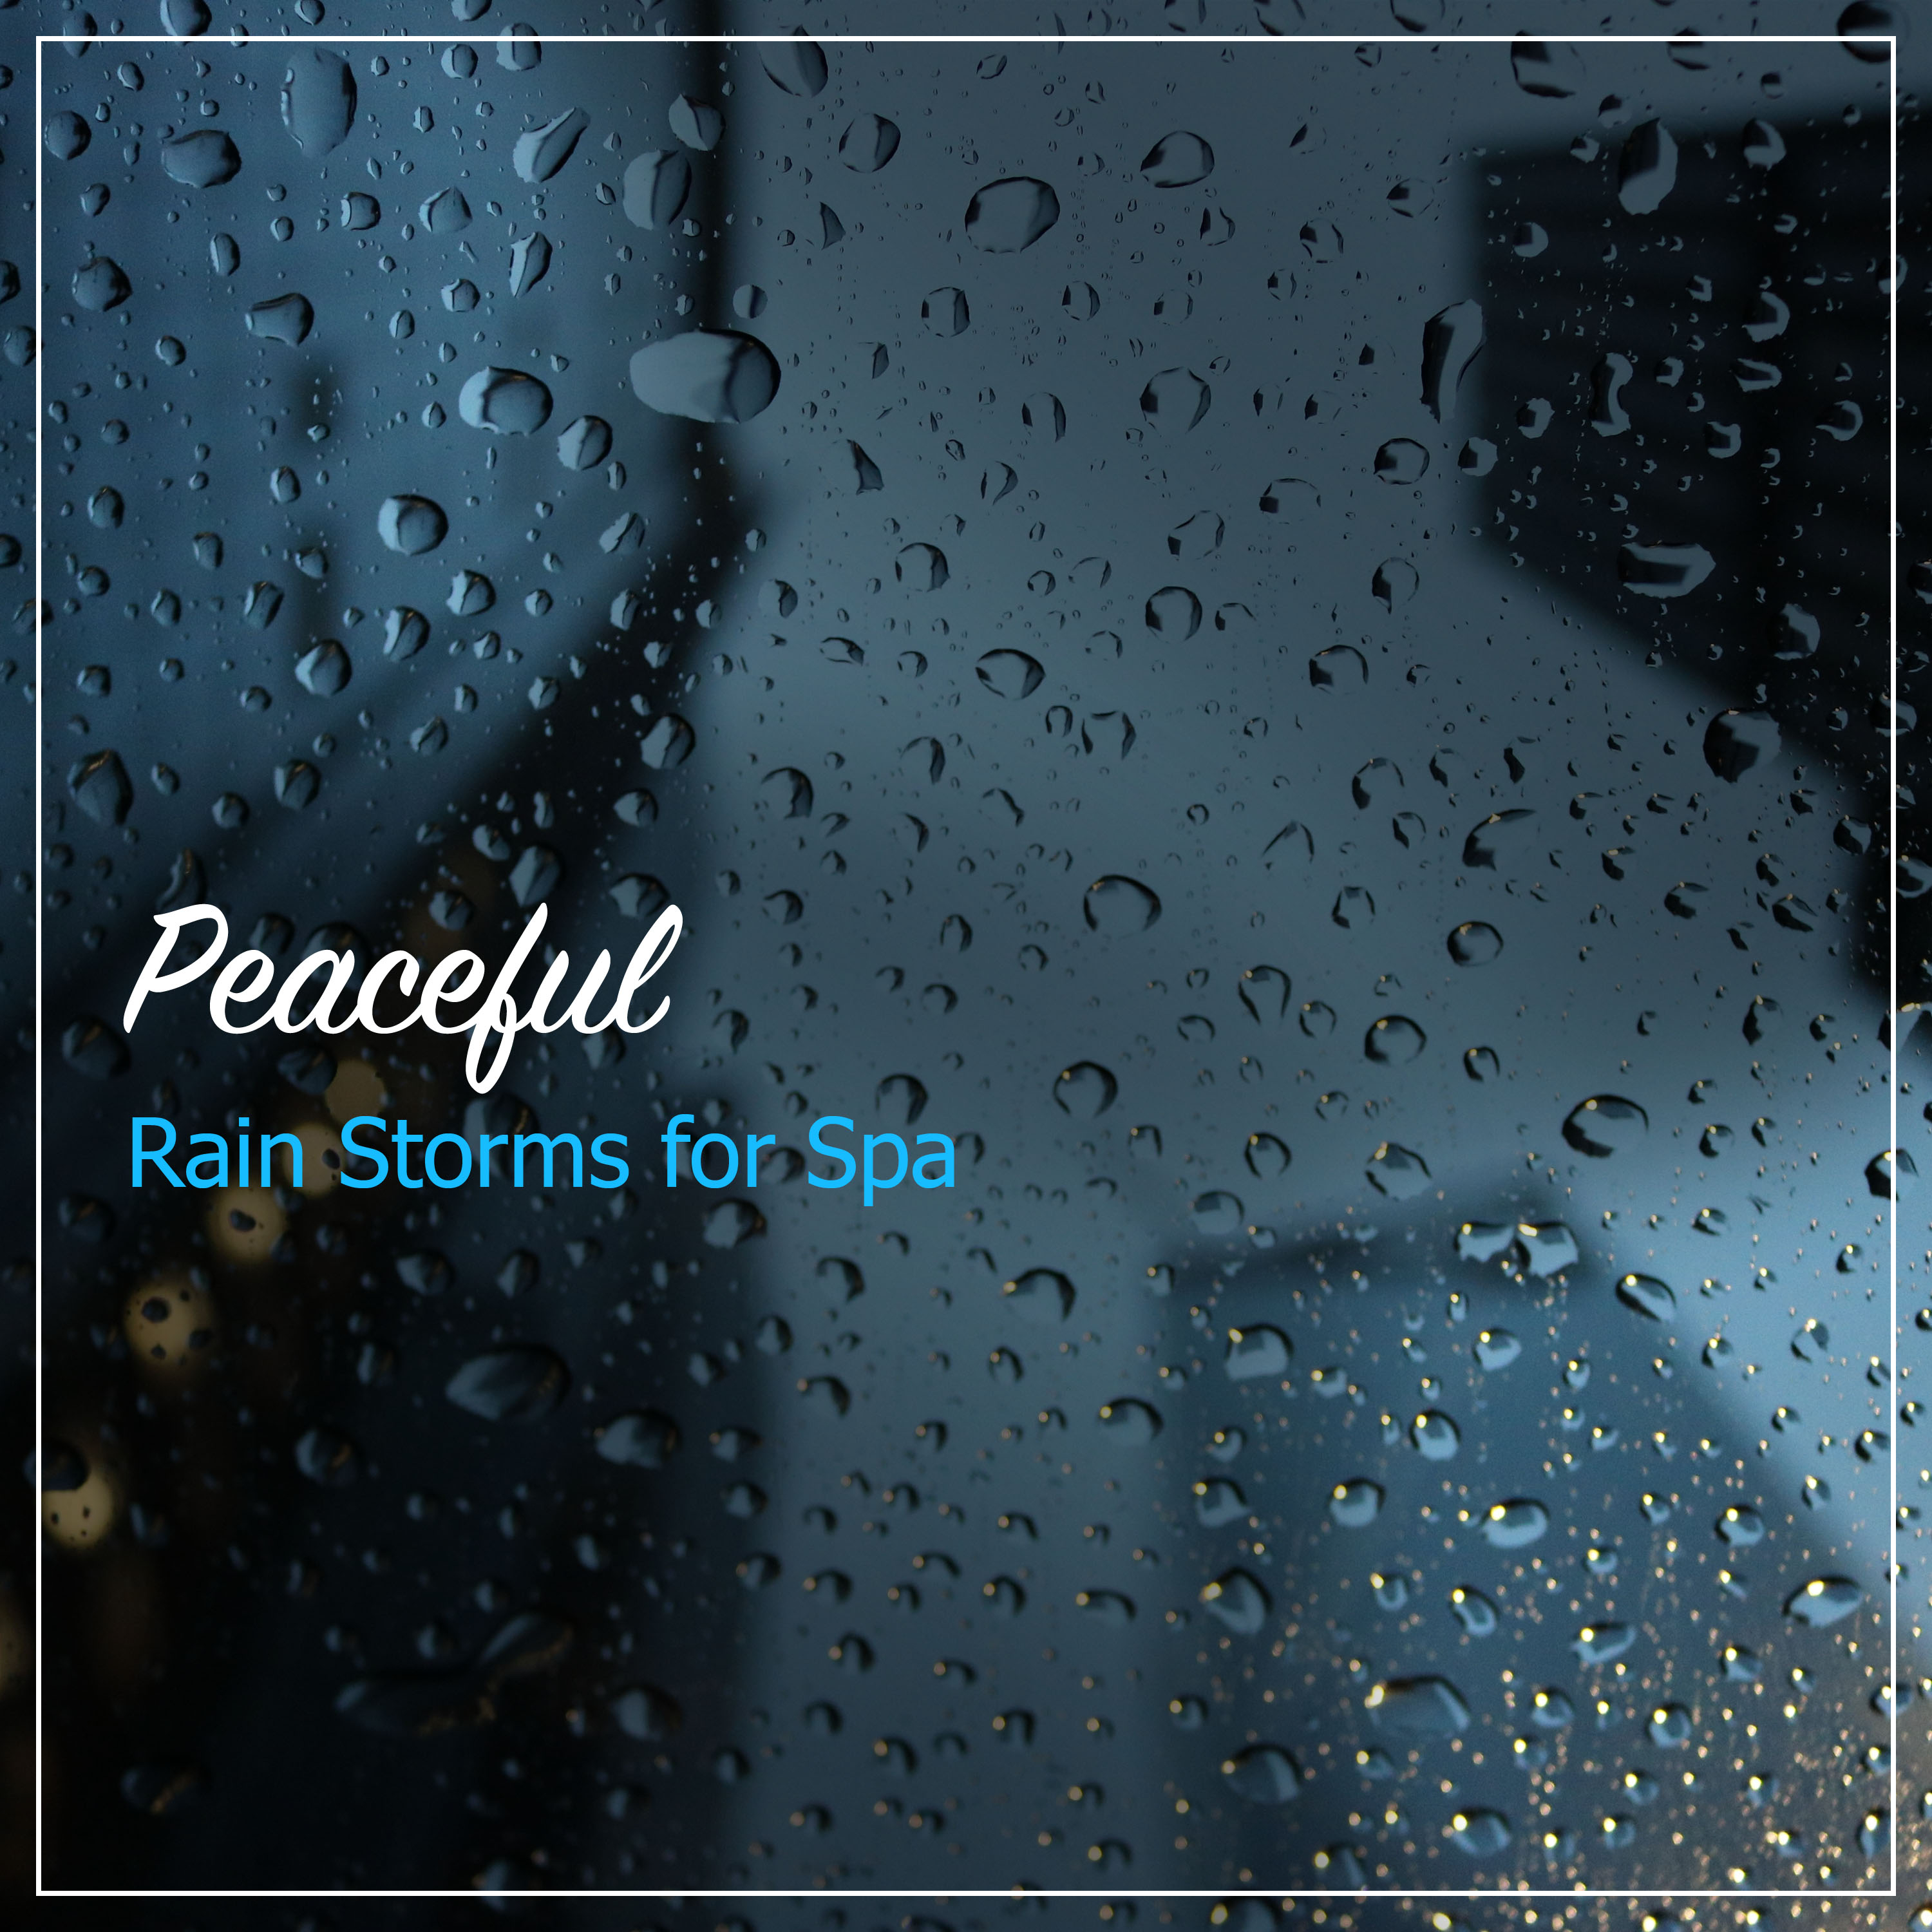 19 Peaceful Rain Storms for Spa